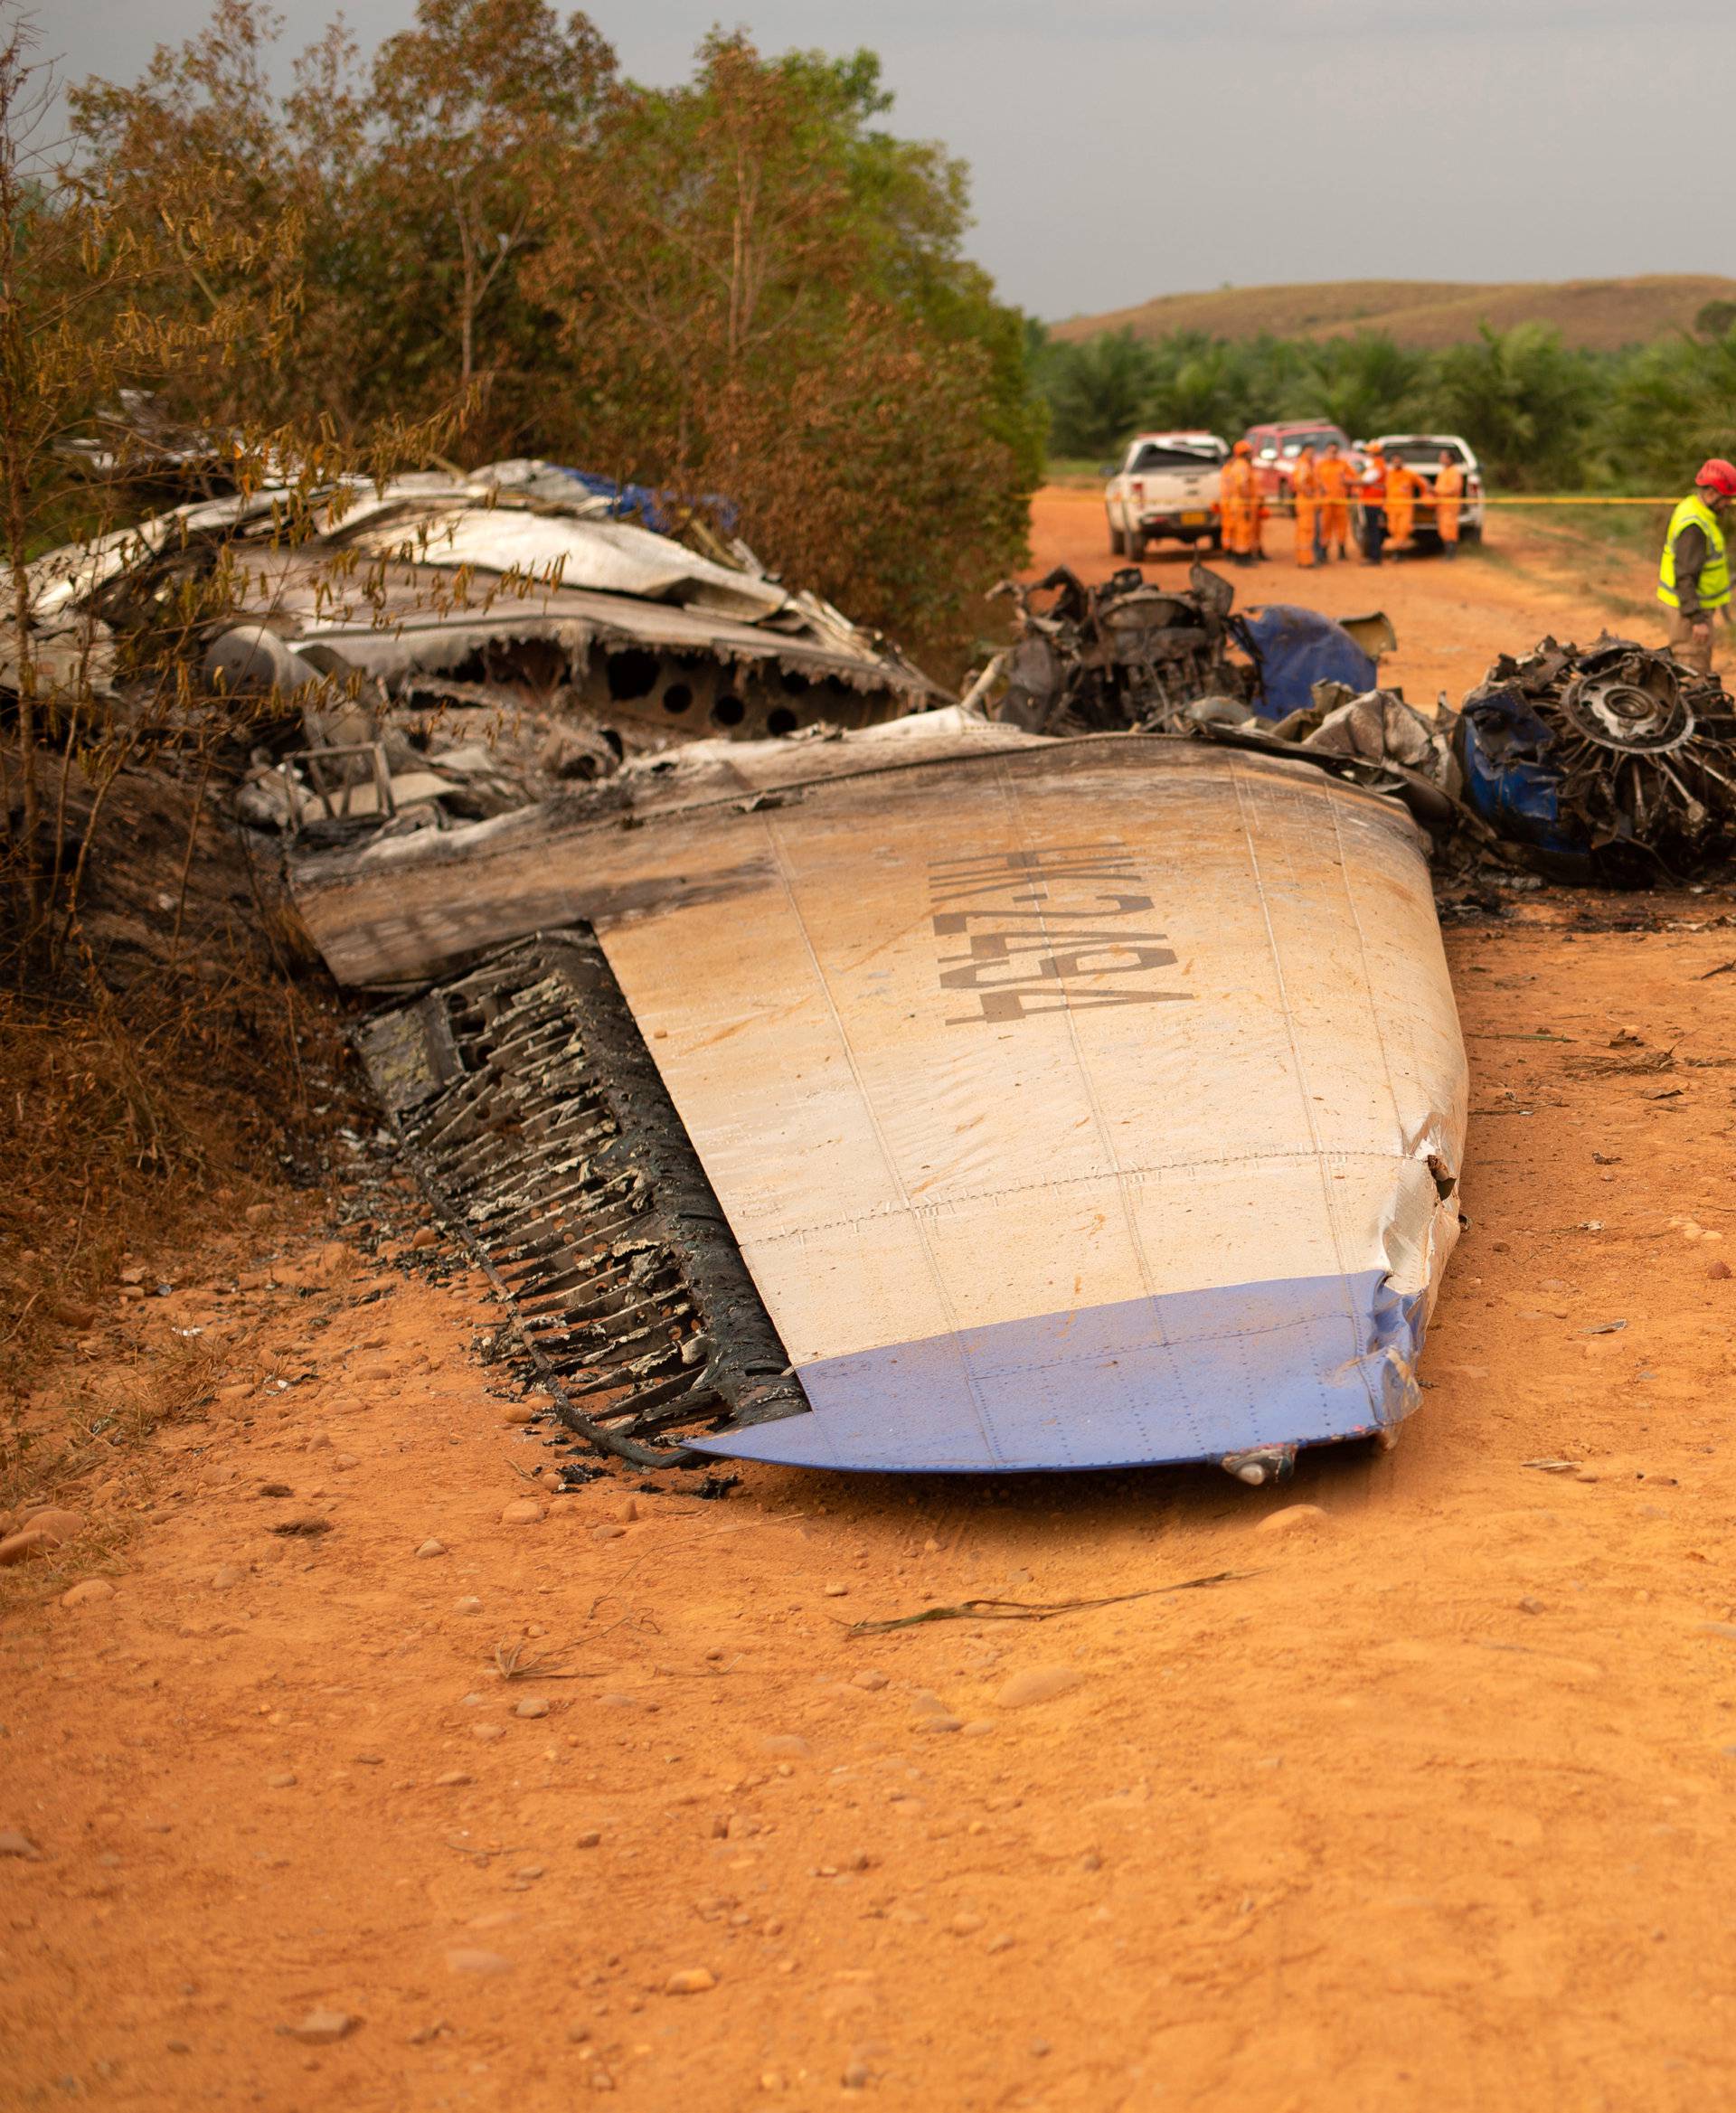 Wreckage is seen of a Douglas DC-3 passenger aircraft which crashed on the Colombian plains province of Meta, San Martin